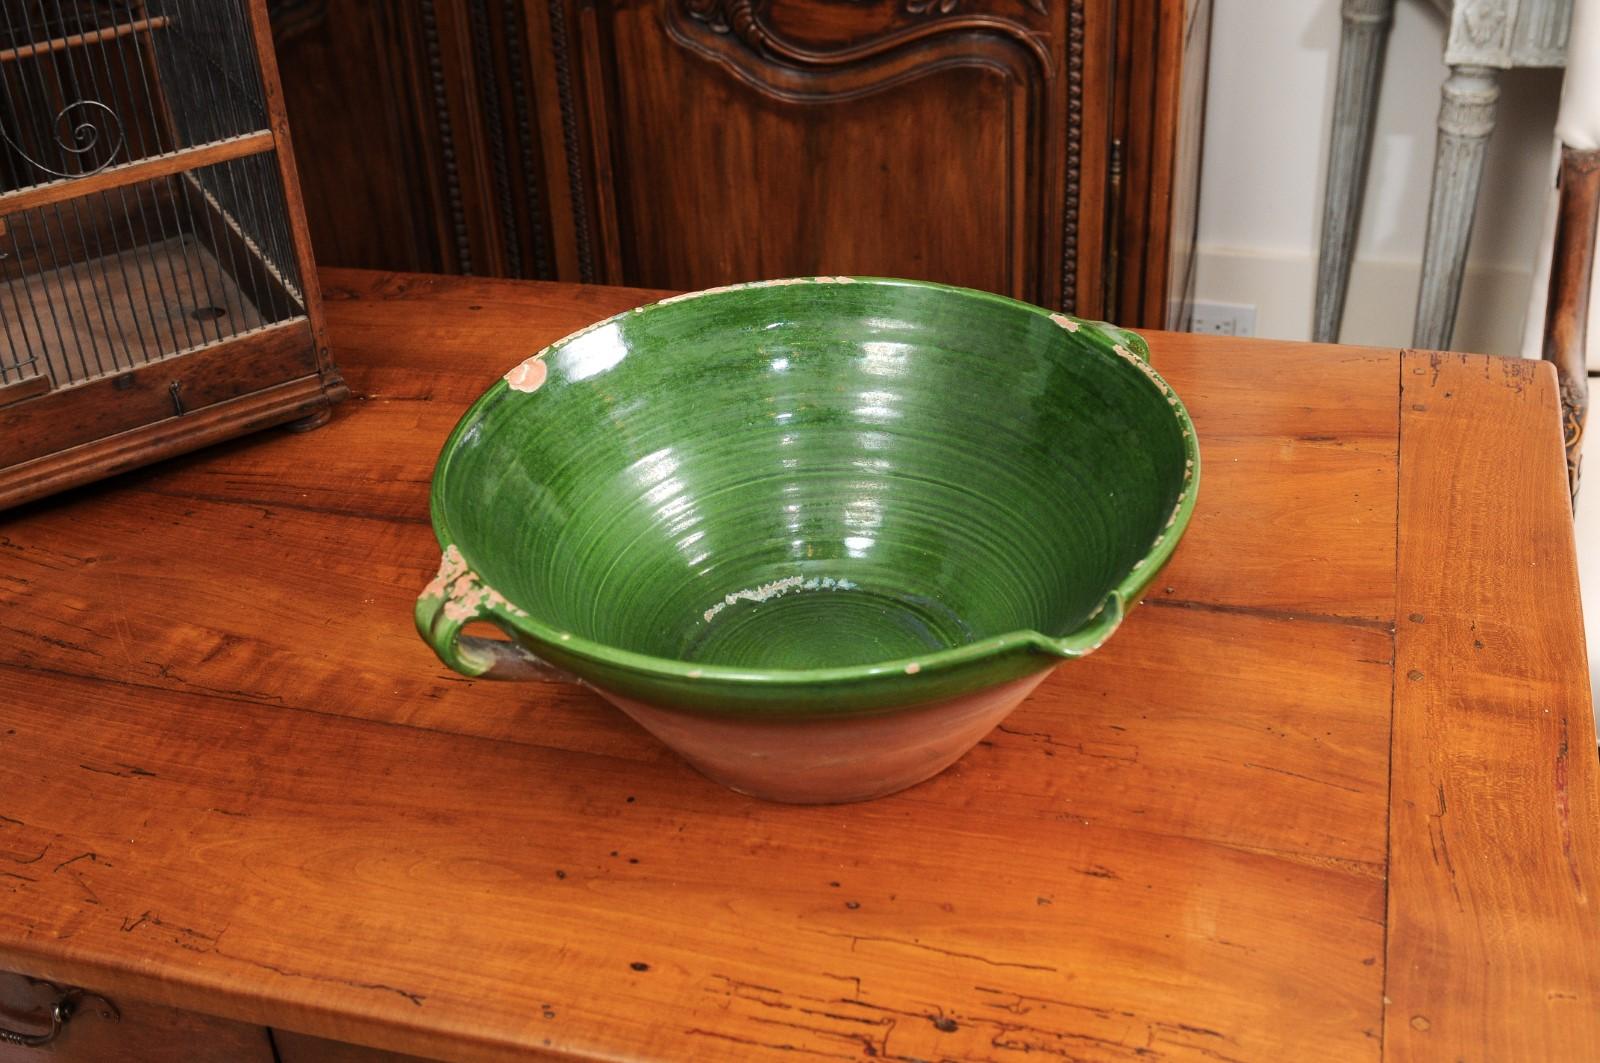 A French Provincial Napoléon III period green glazed terracotta bowl from the mid-19th century, with two handles and pouring lip. Created in France at the beginning of Emperor Napoléon III's reign, this pottery bowl features a circular body,